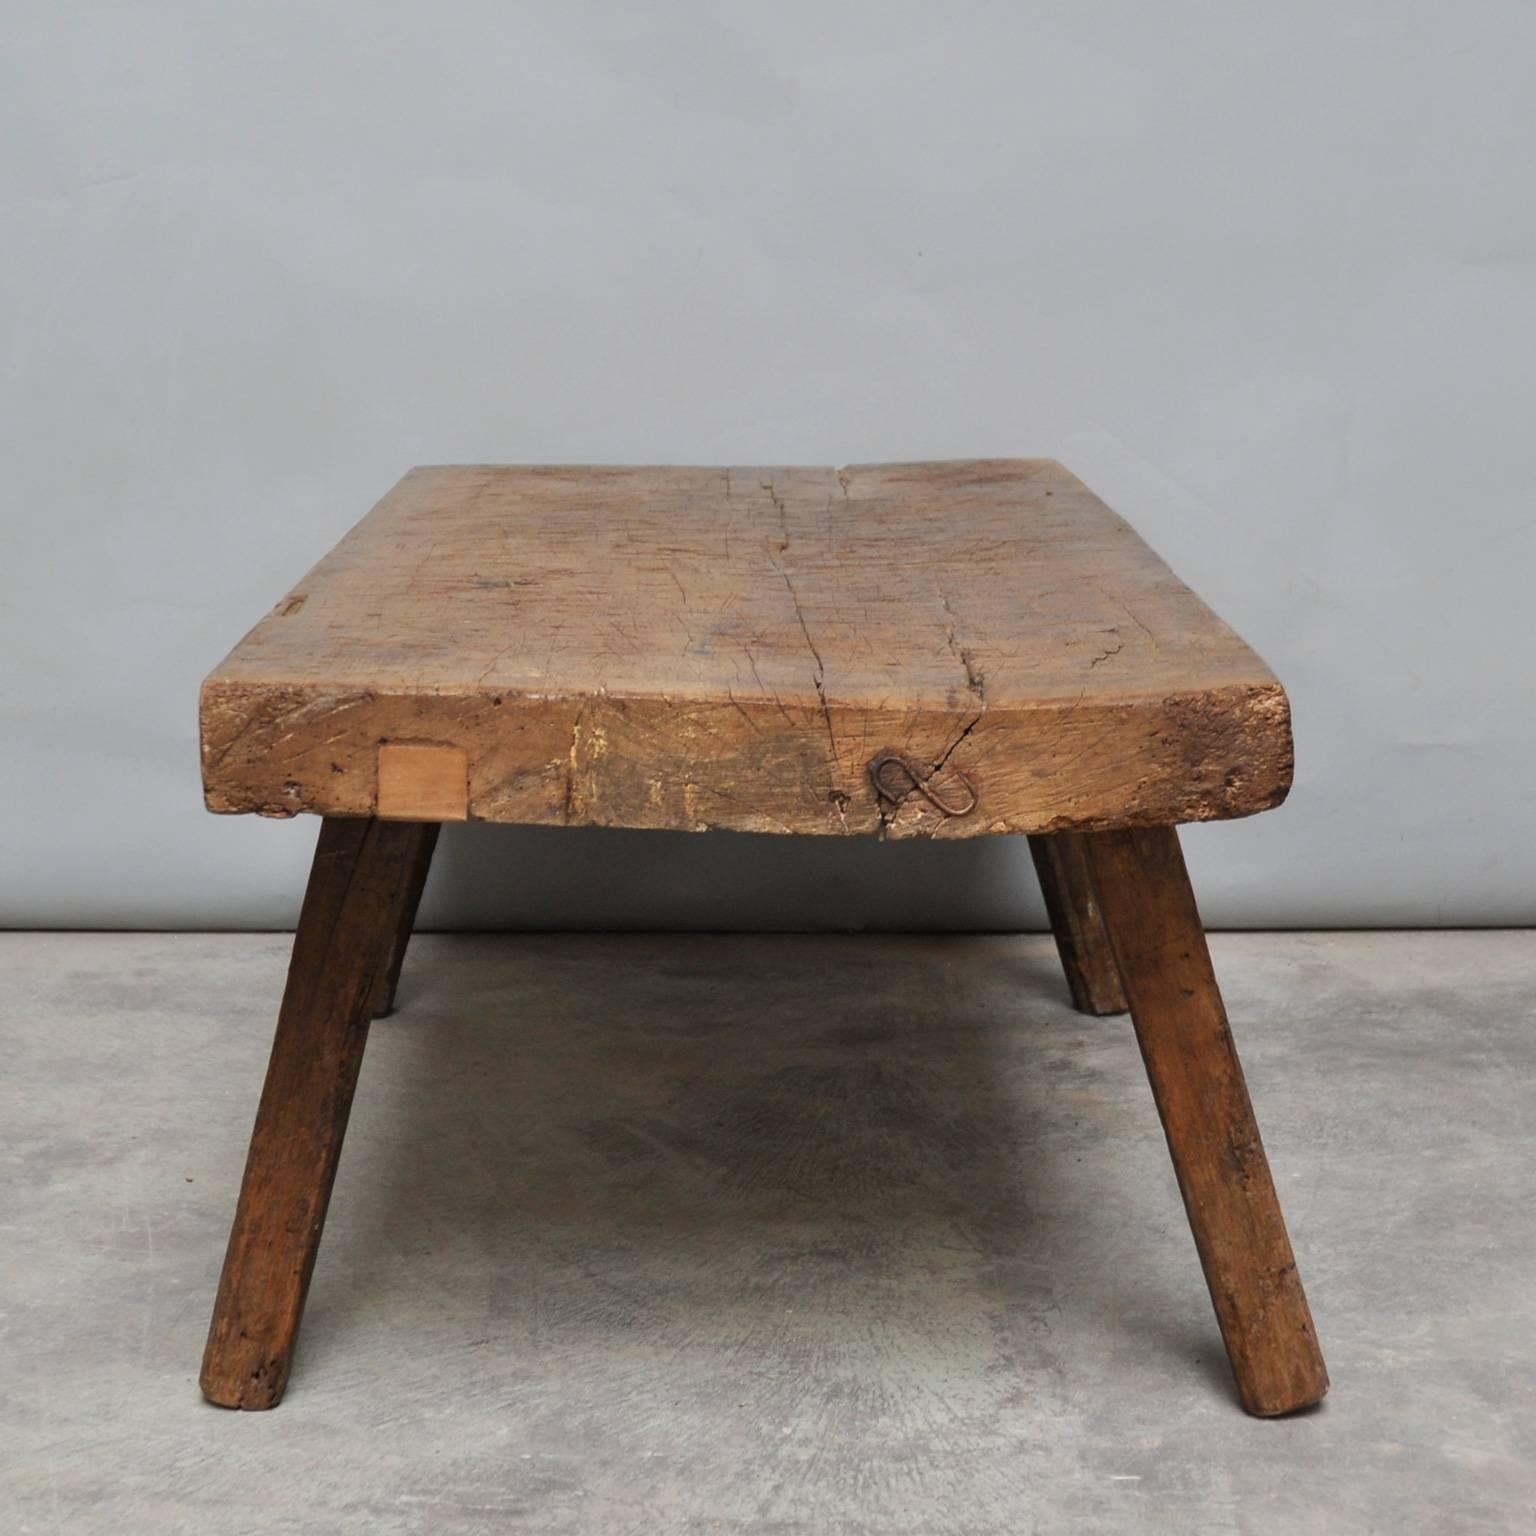 This oak butcher's block was produced in Hungary around the 1930s and has a 10 cm thick top. The piece features the original oak legs and has been wax-finished. The legs has been cut down to a standard coffee table or bench size.